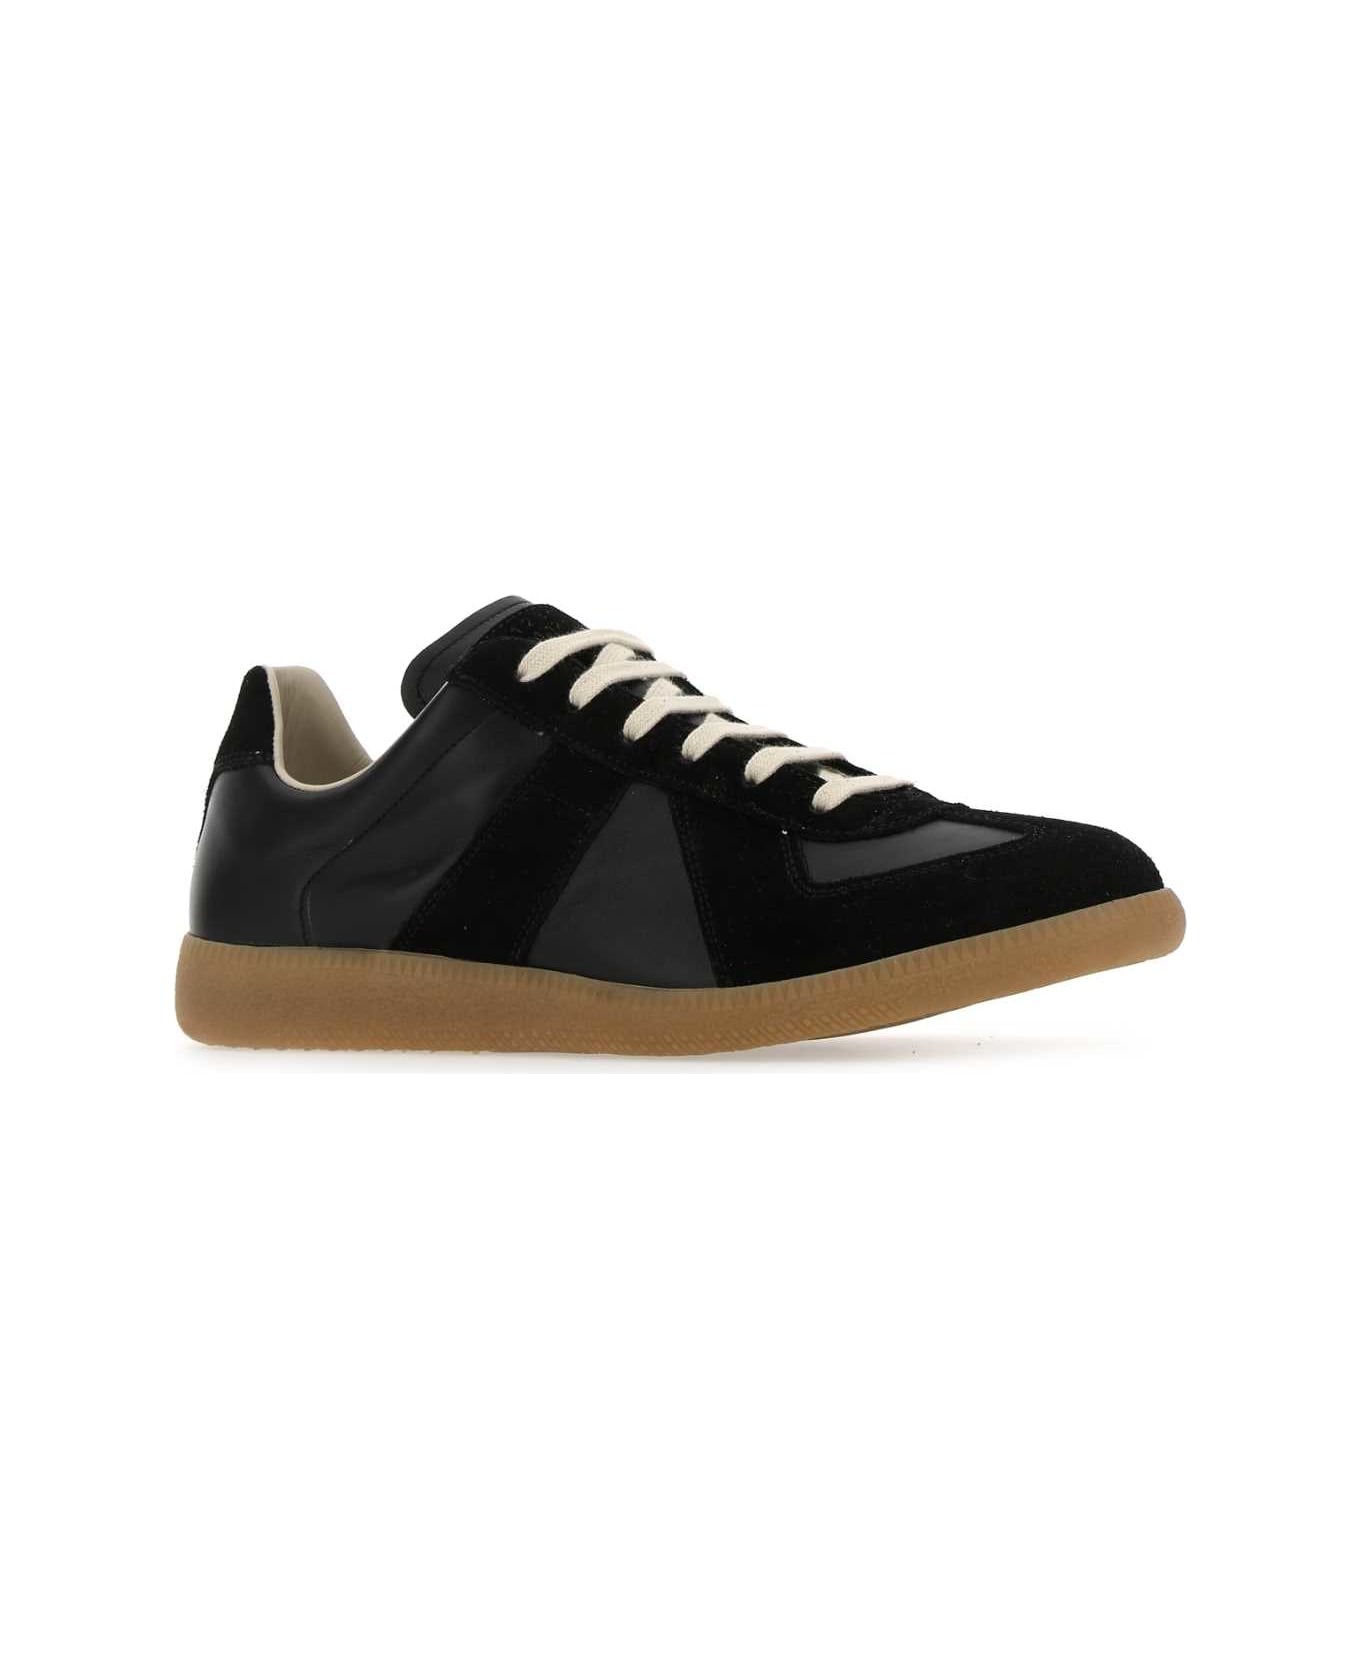 Maison Margiela Black Leather And Suede Replica Sneakers - H6851